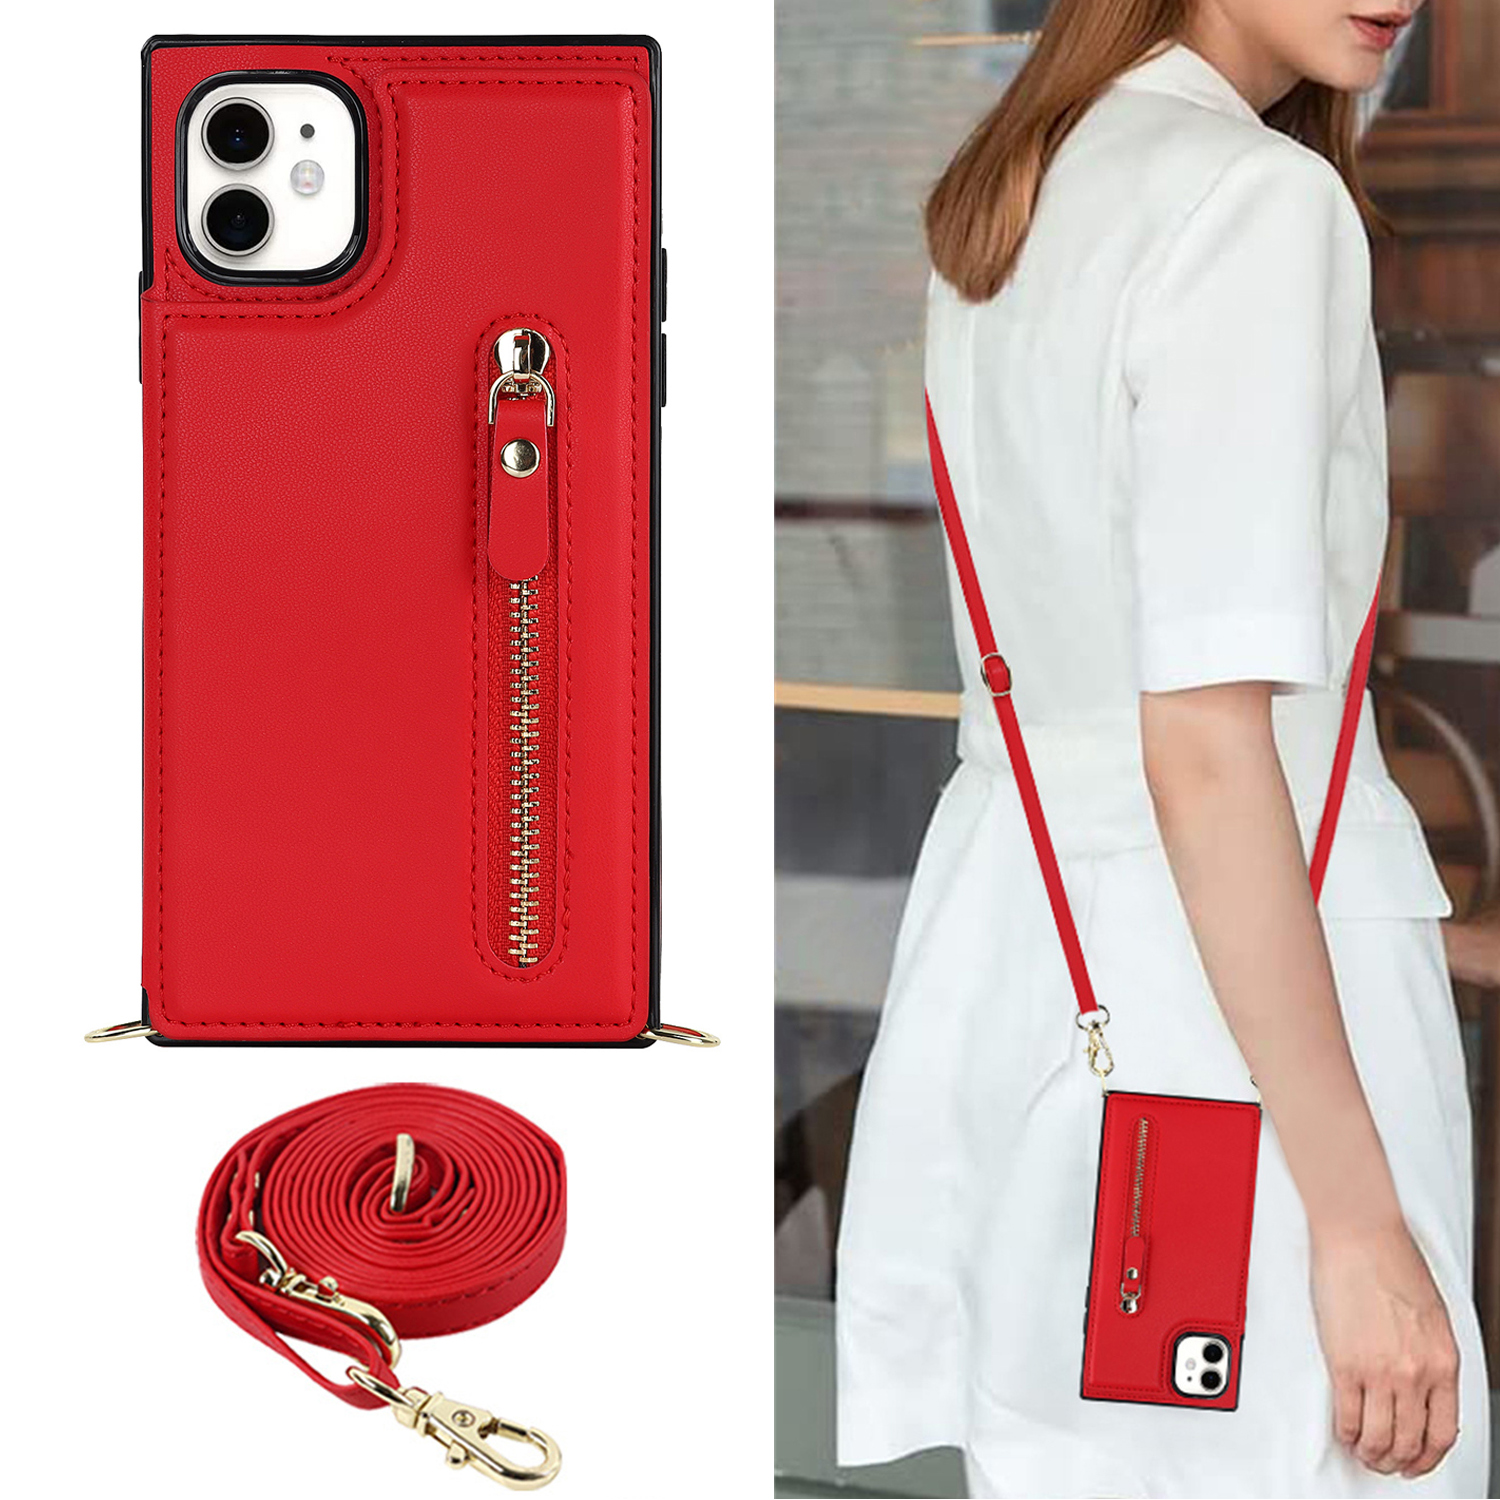 2023 Bandolier Phone Cases and Product Reviews - Crossbody Smart